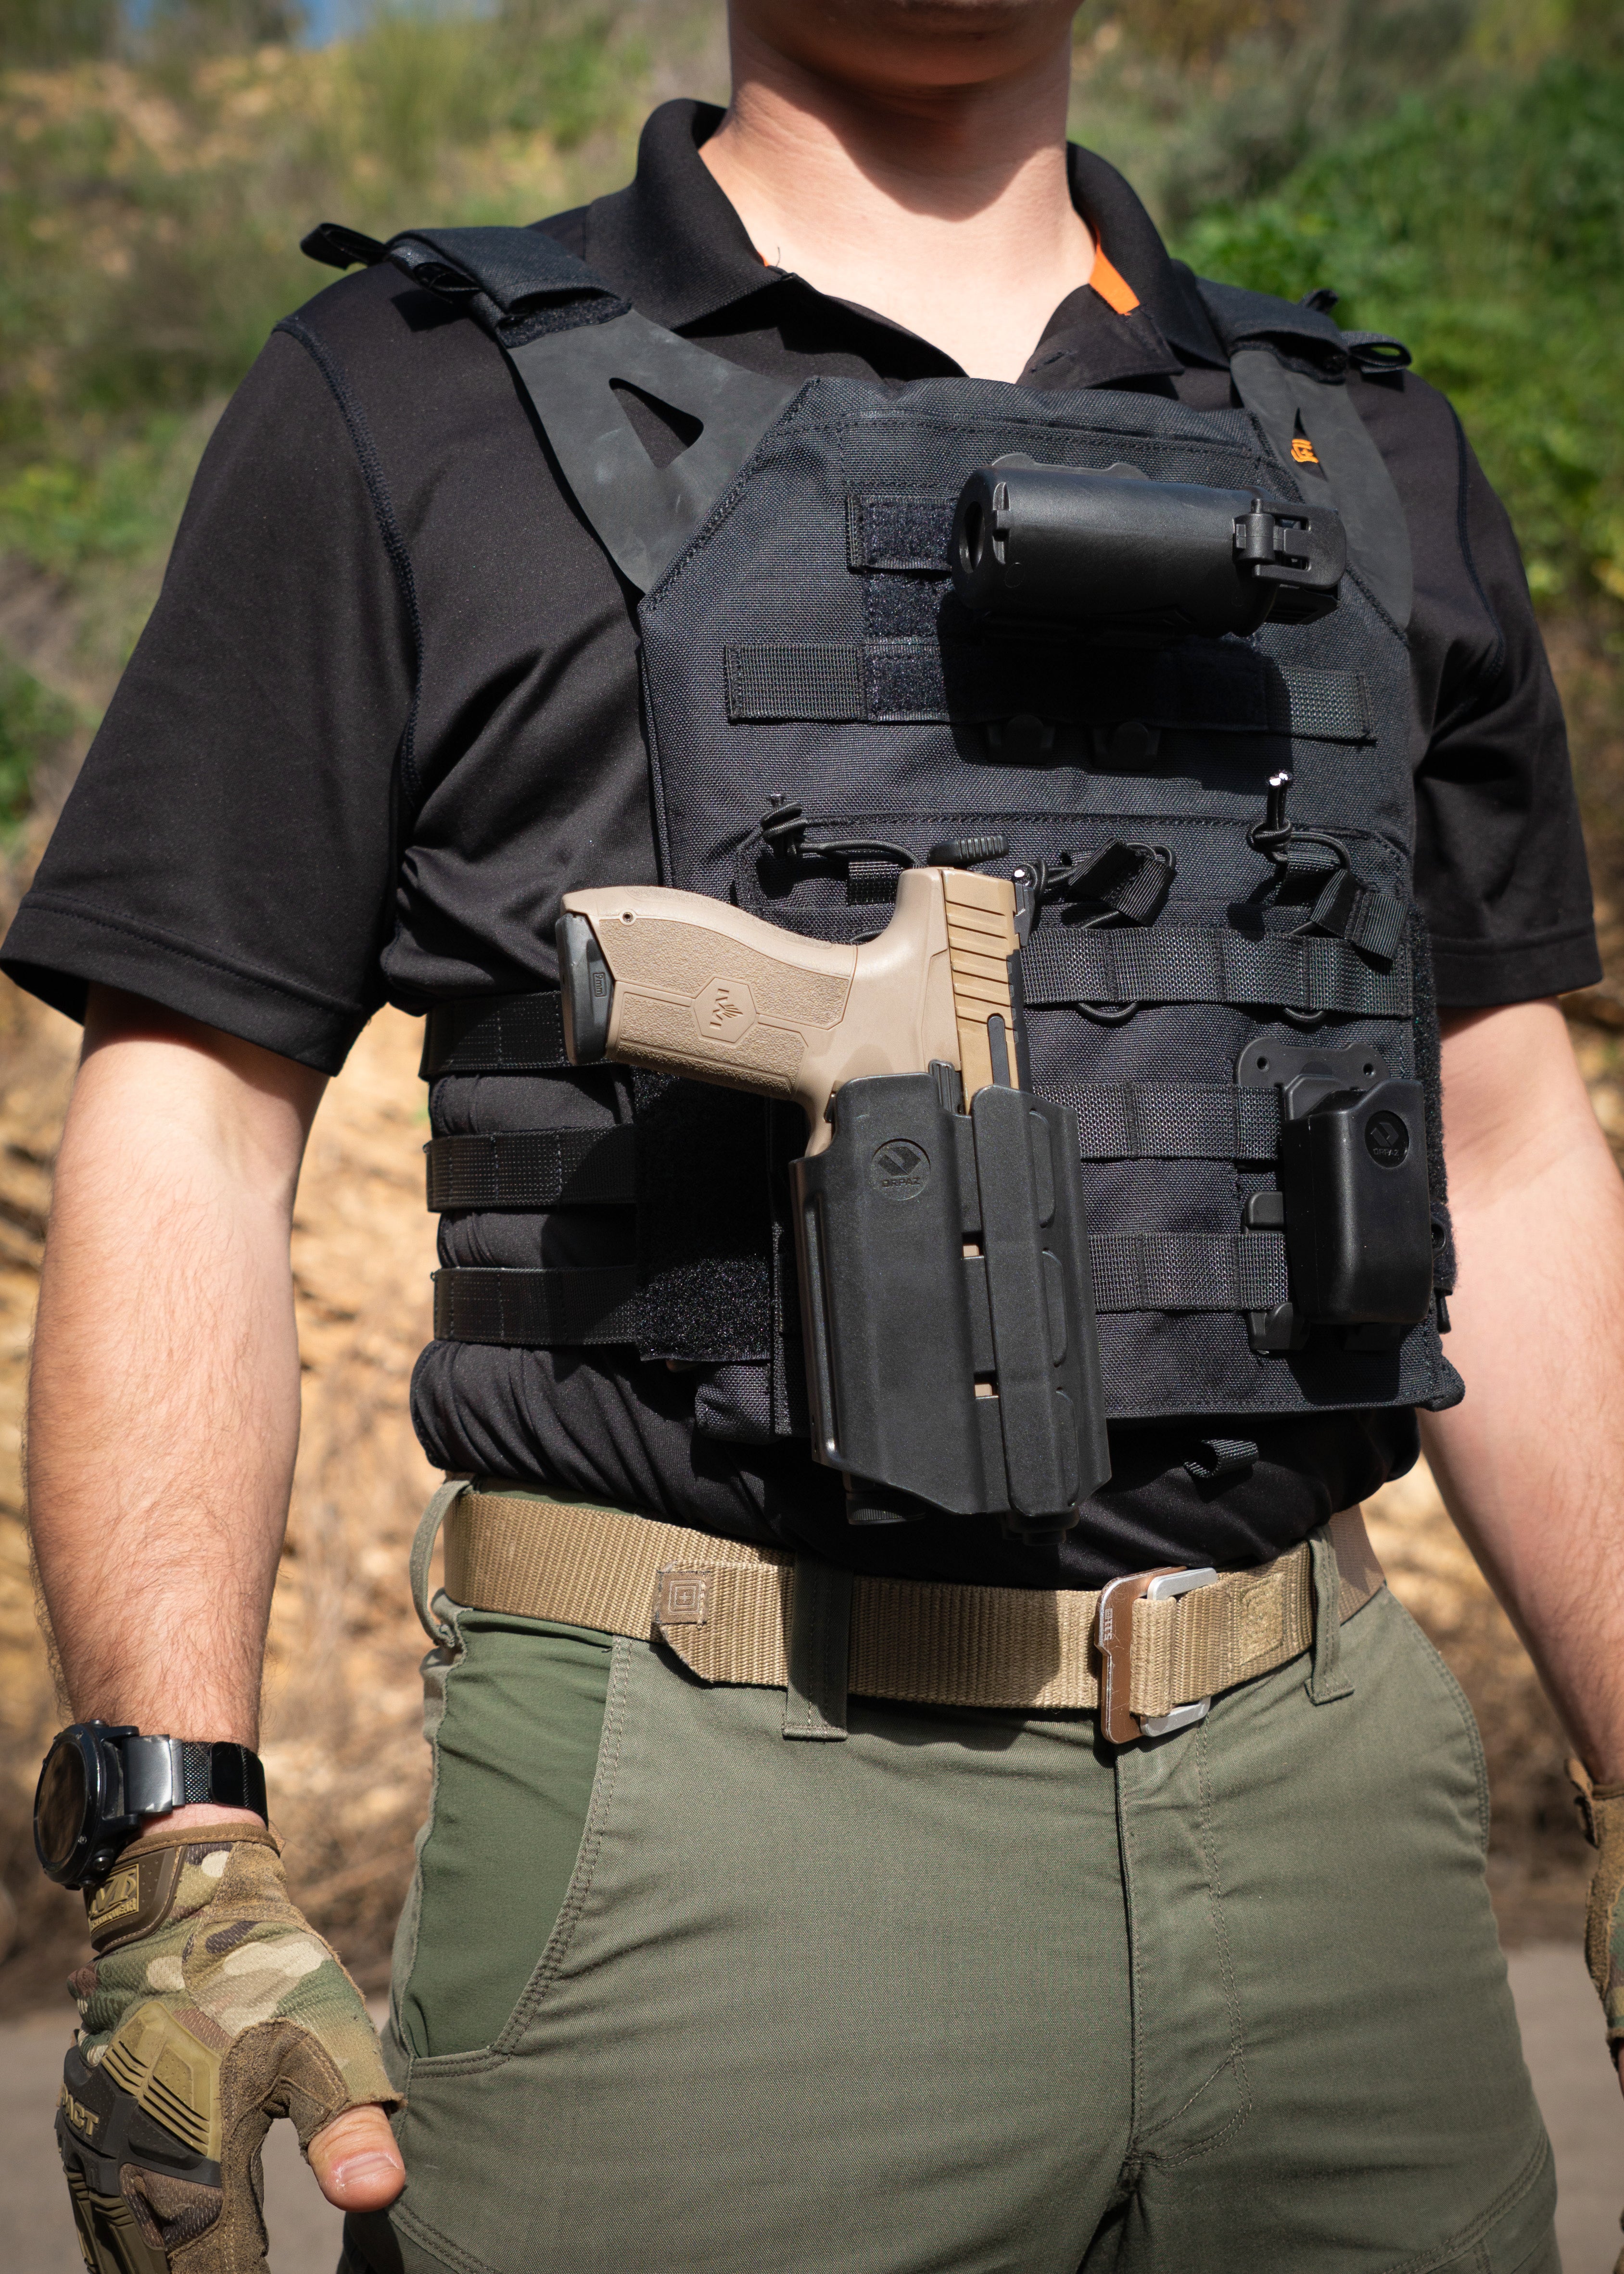 II. Understanding the Importance of Holster Compatibility with Tactical Lights